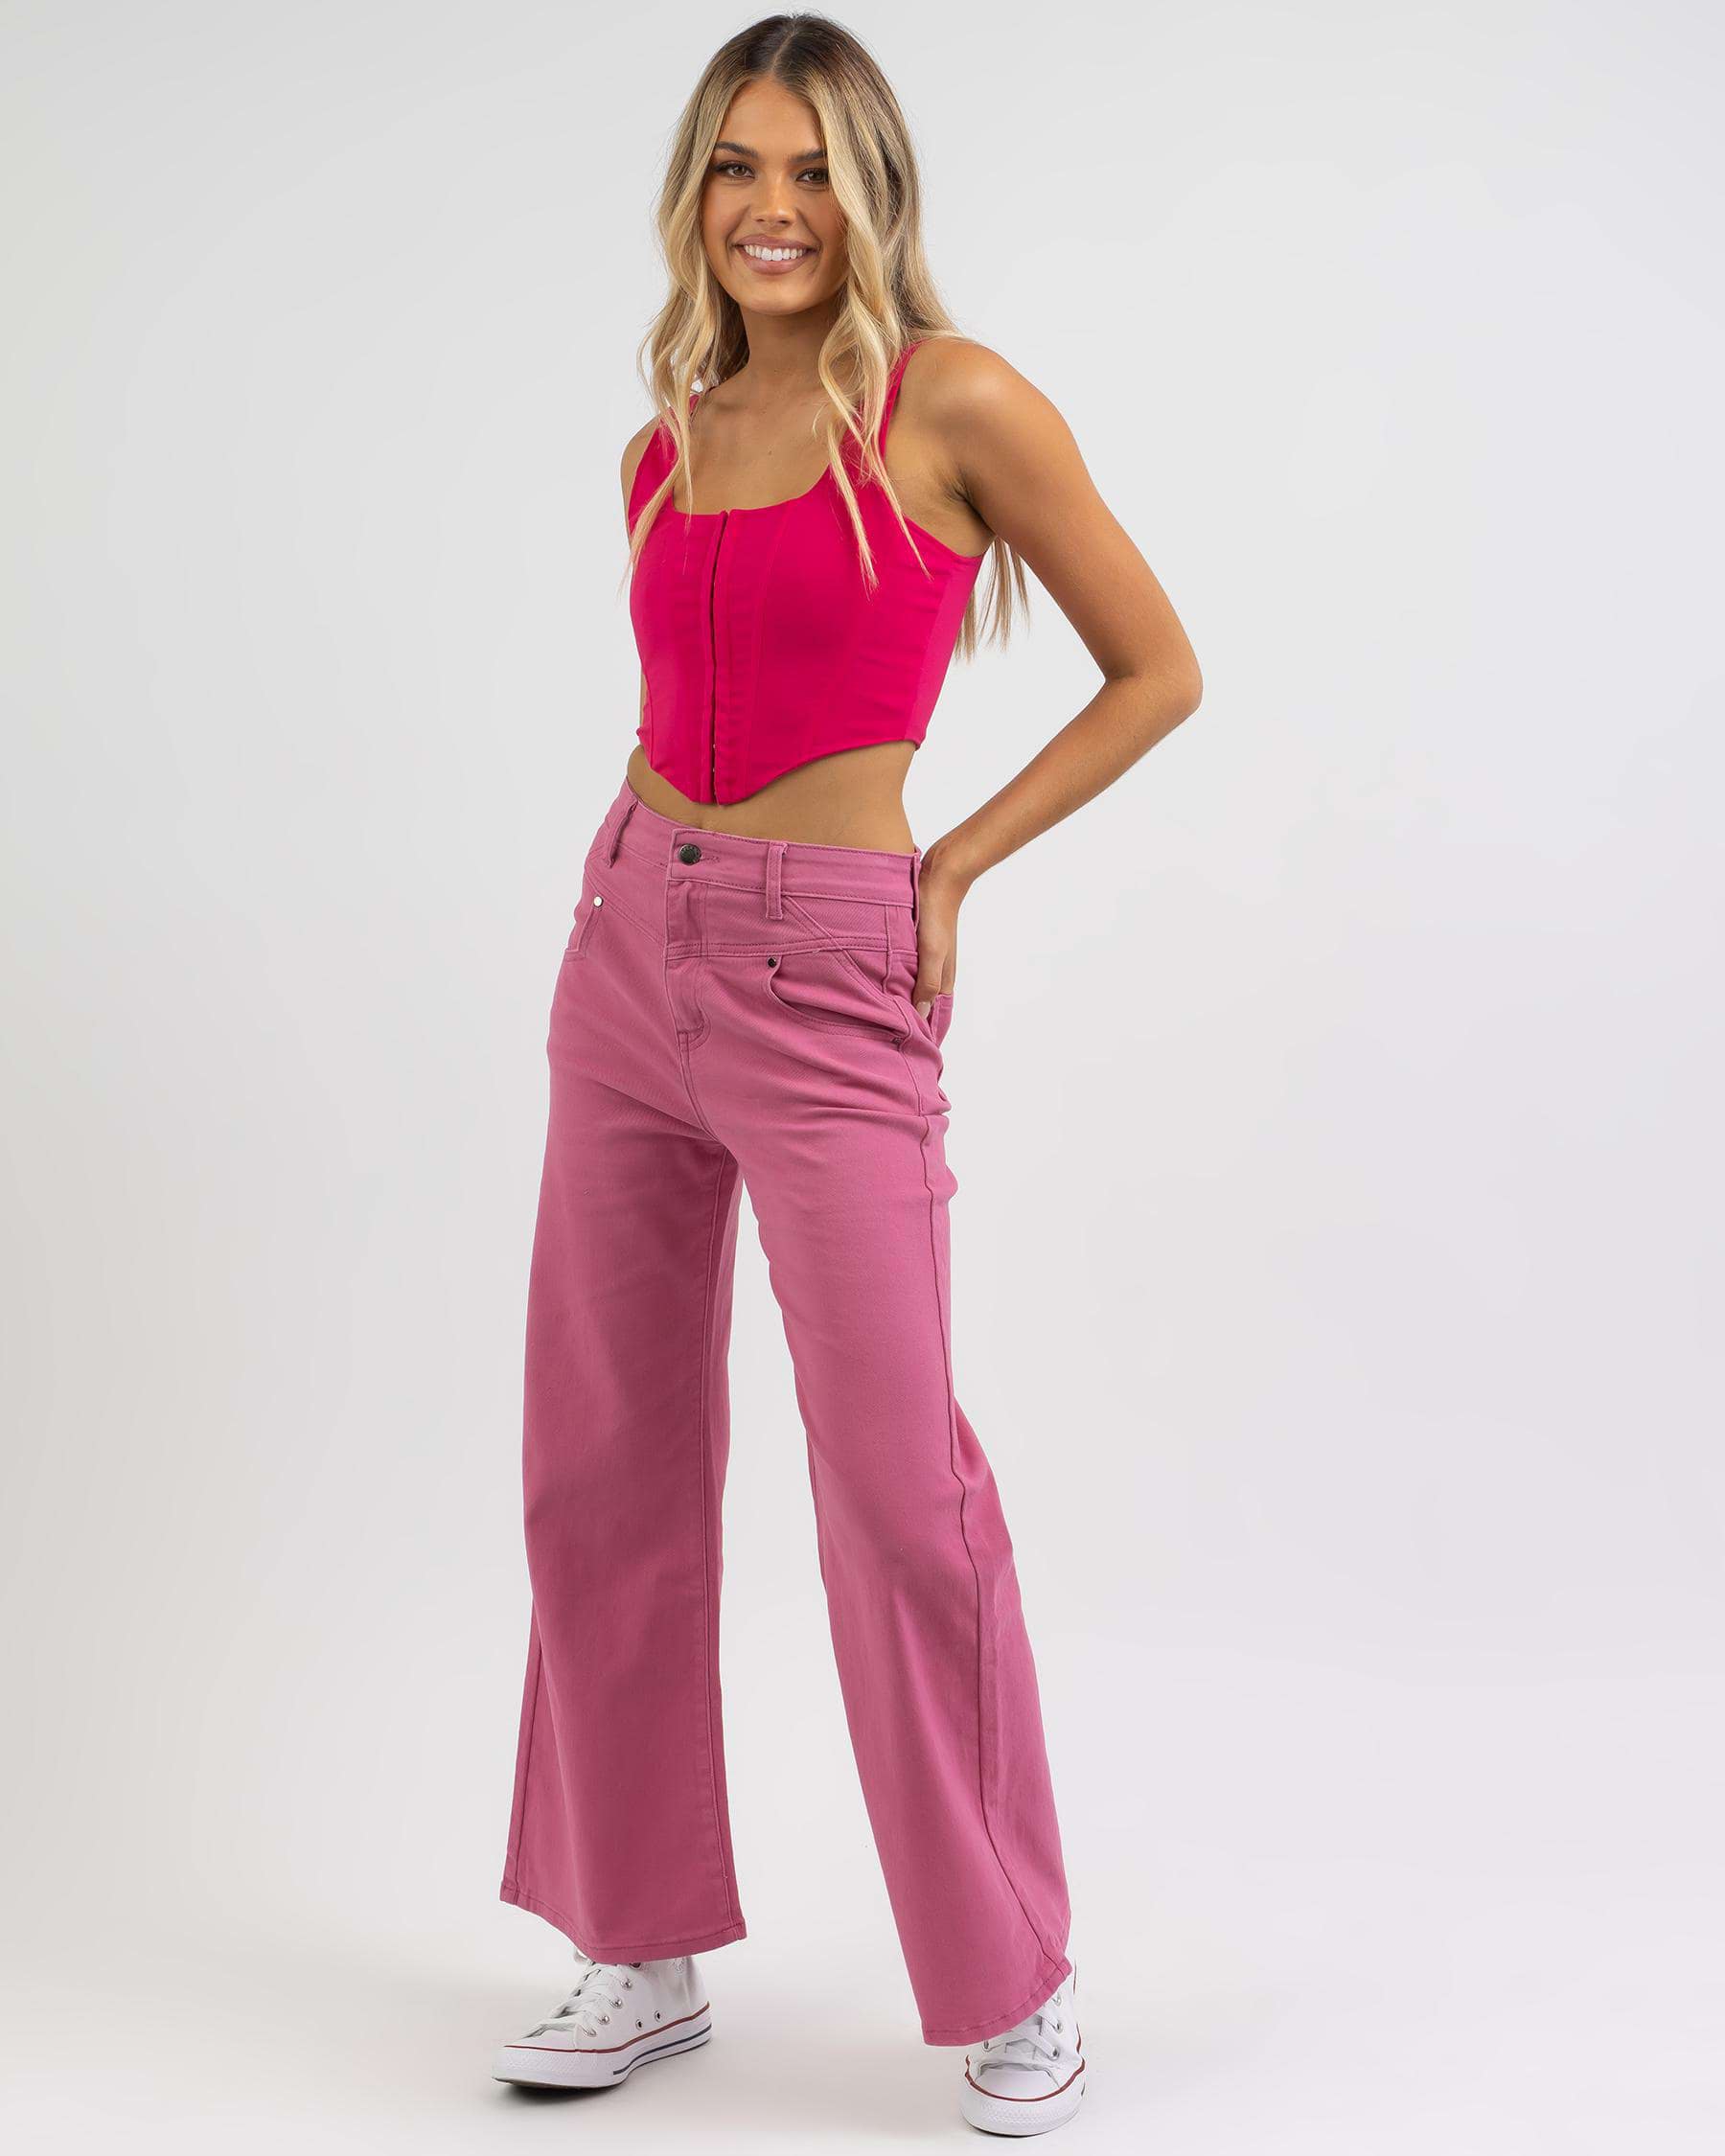 Shop Paper Heart Jada Jeans In Hot Pink - Fast Shipping & Easy Returns ...